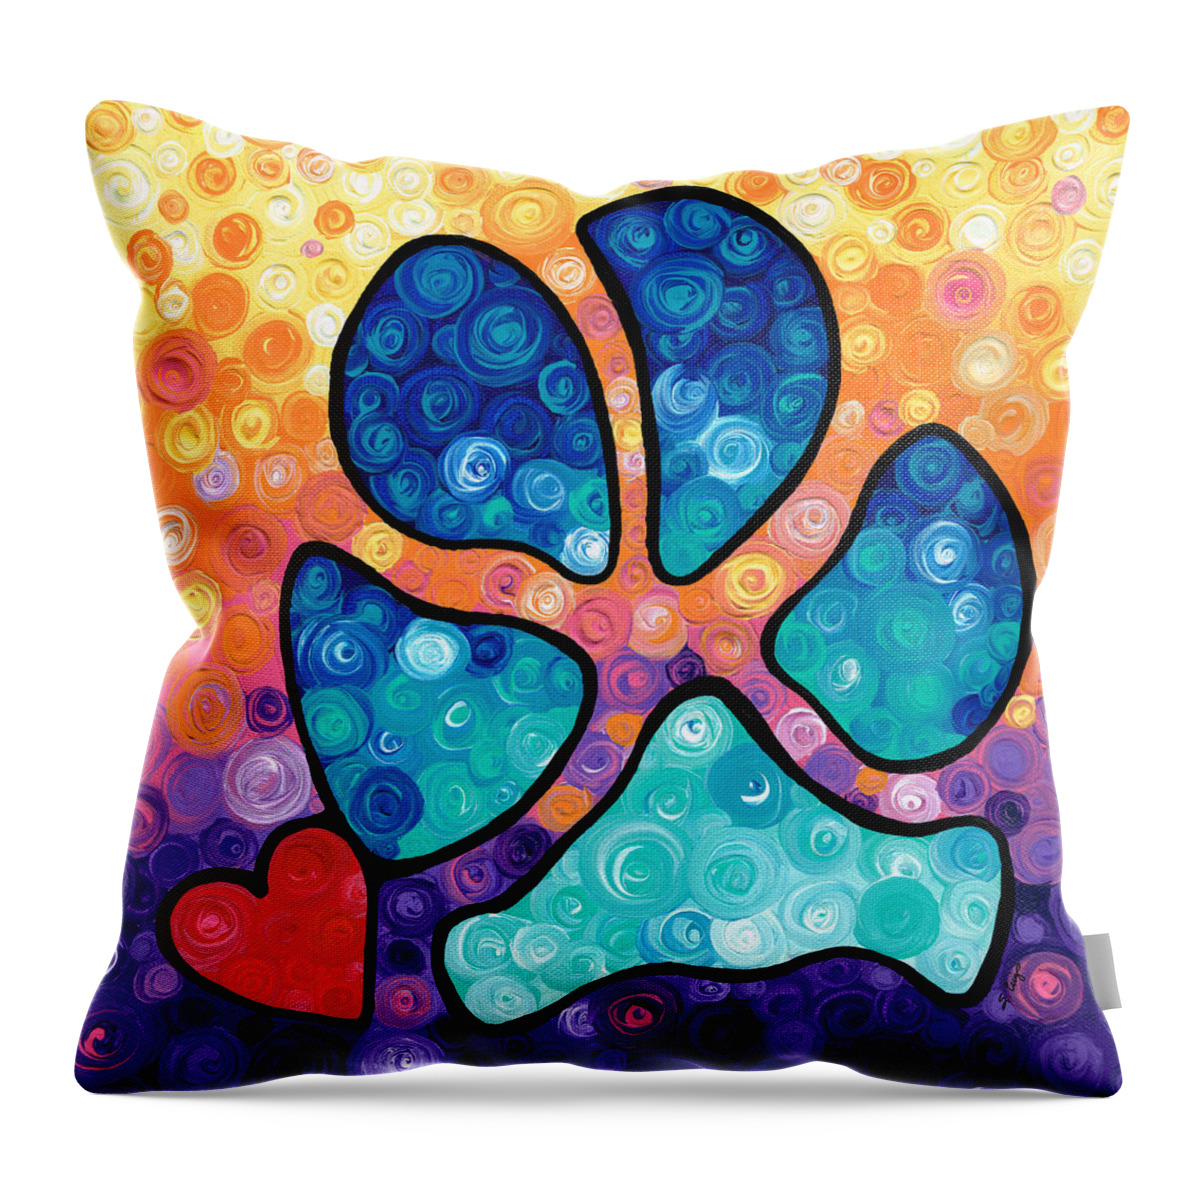 Dog Throw Pillow featuring the painting Puppy Love - Colorful Dog Paw Art By Sharon Cummings by Sharon Cummings